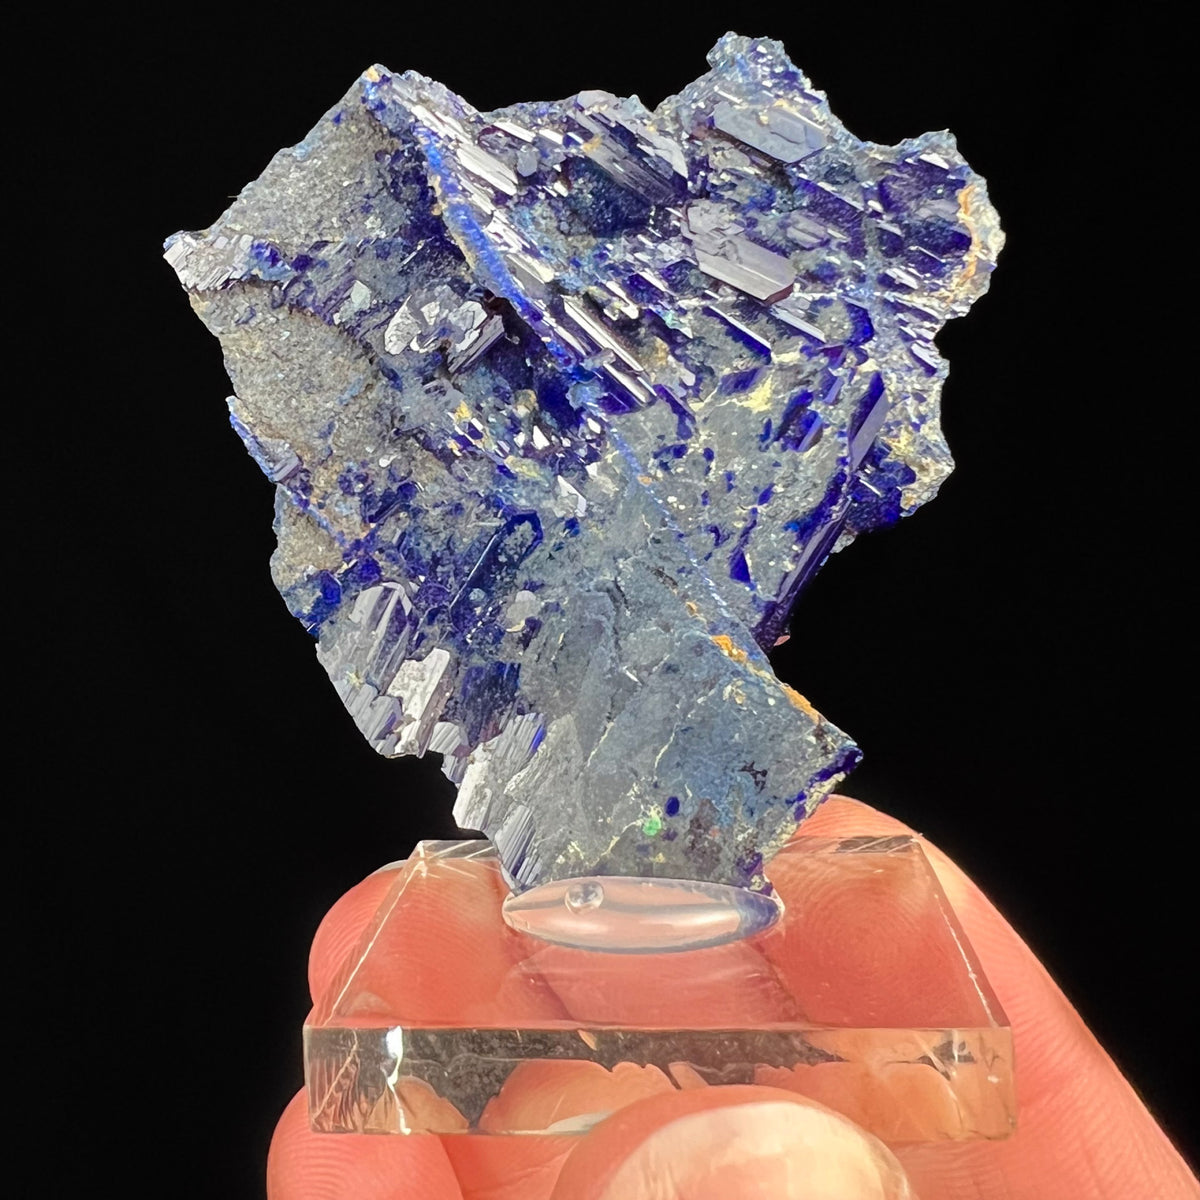 Azurite crystals in a tabular formation, Namibia